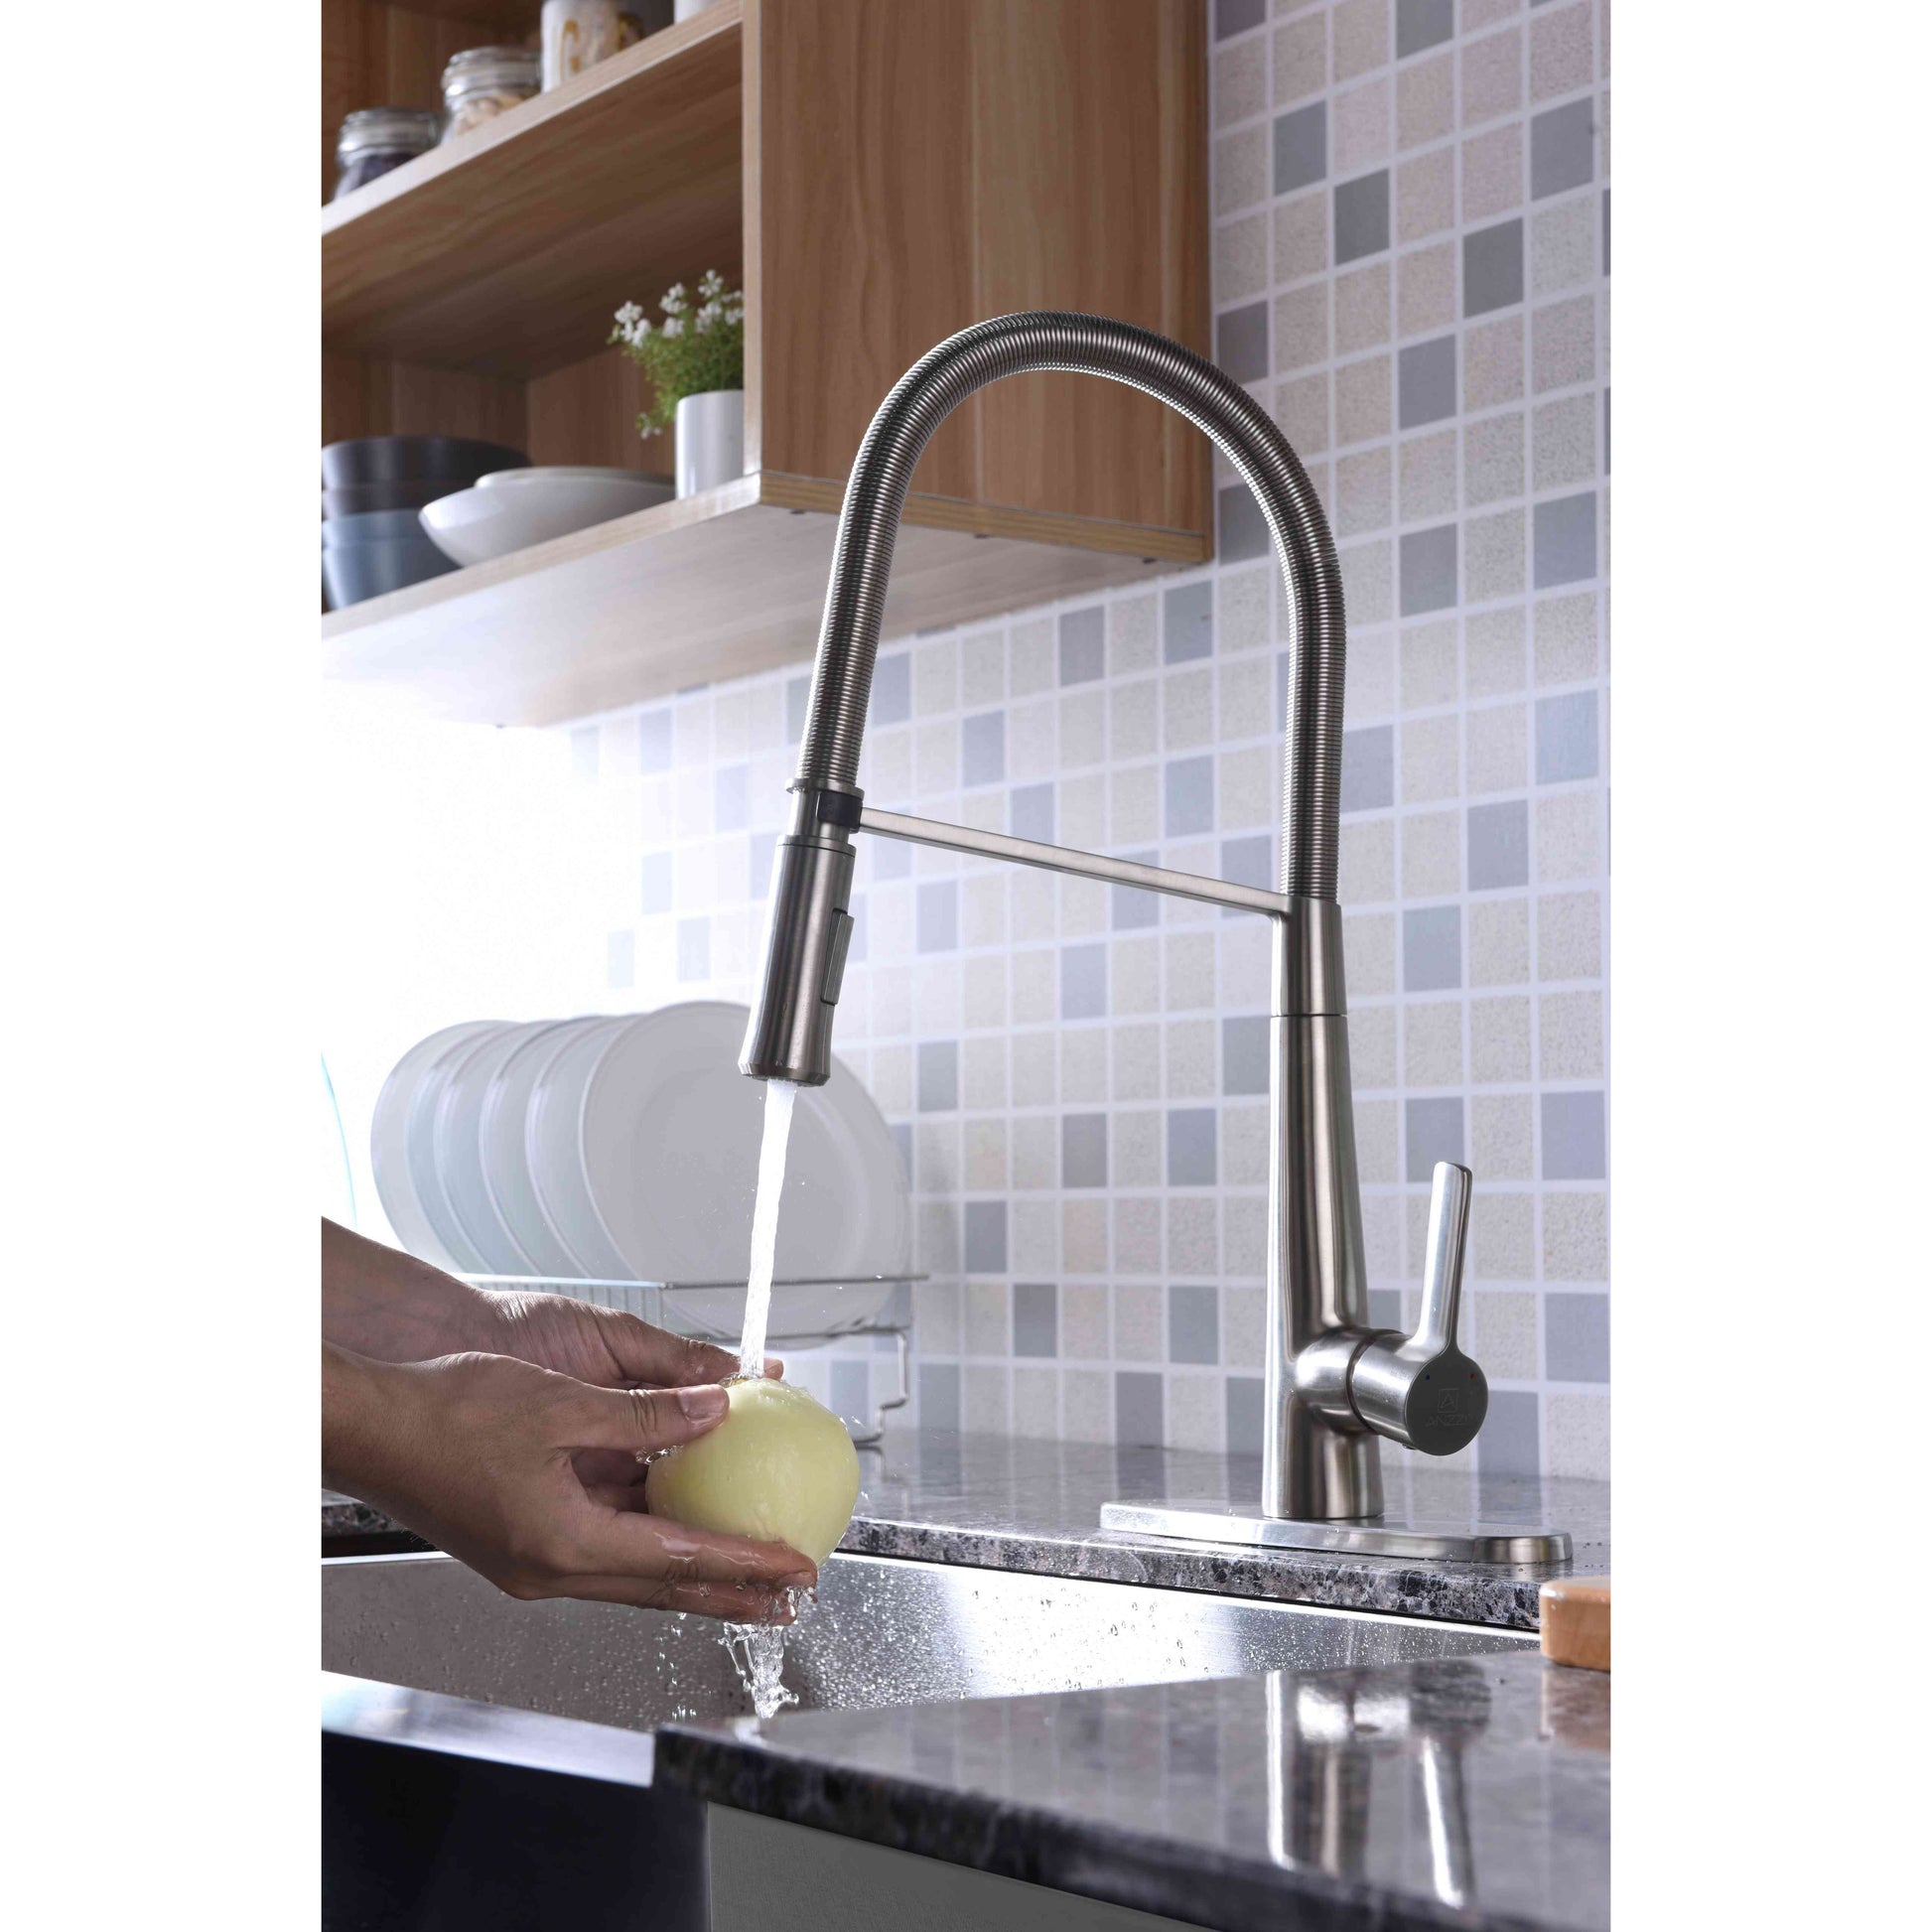 ANZZI Apollo Series Single Hole Brushed Nickel Kitchen Faucet With Euro-Grip Pull Down Sprayer